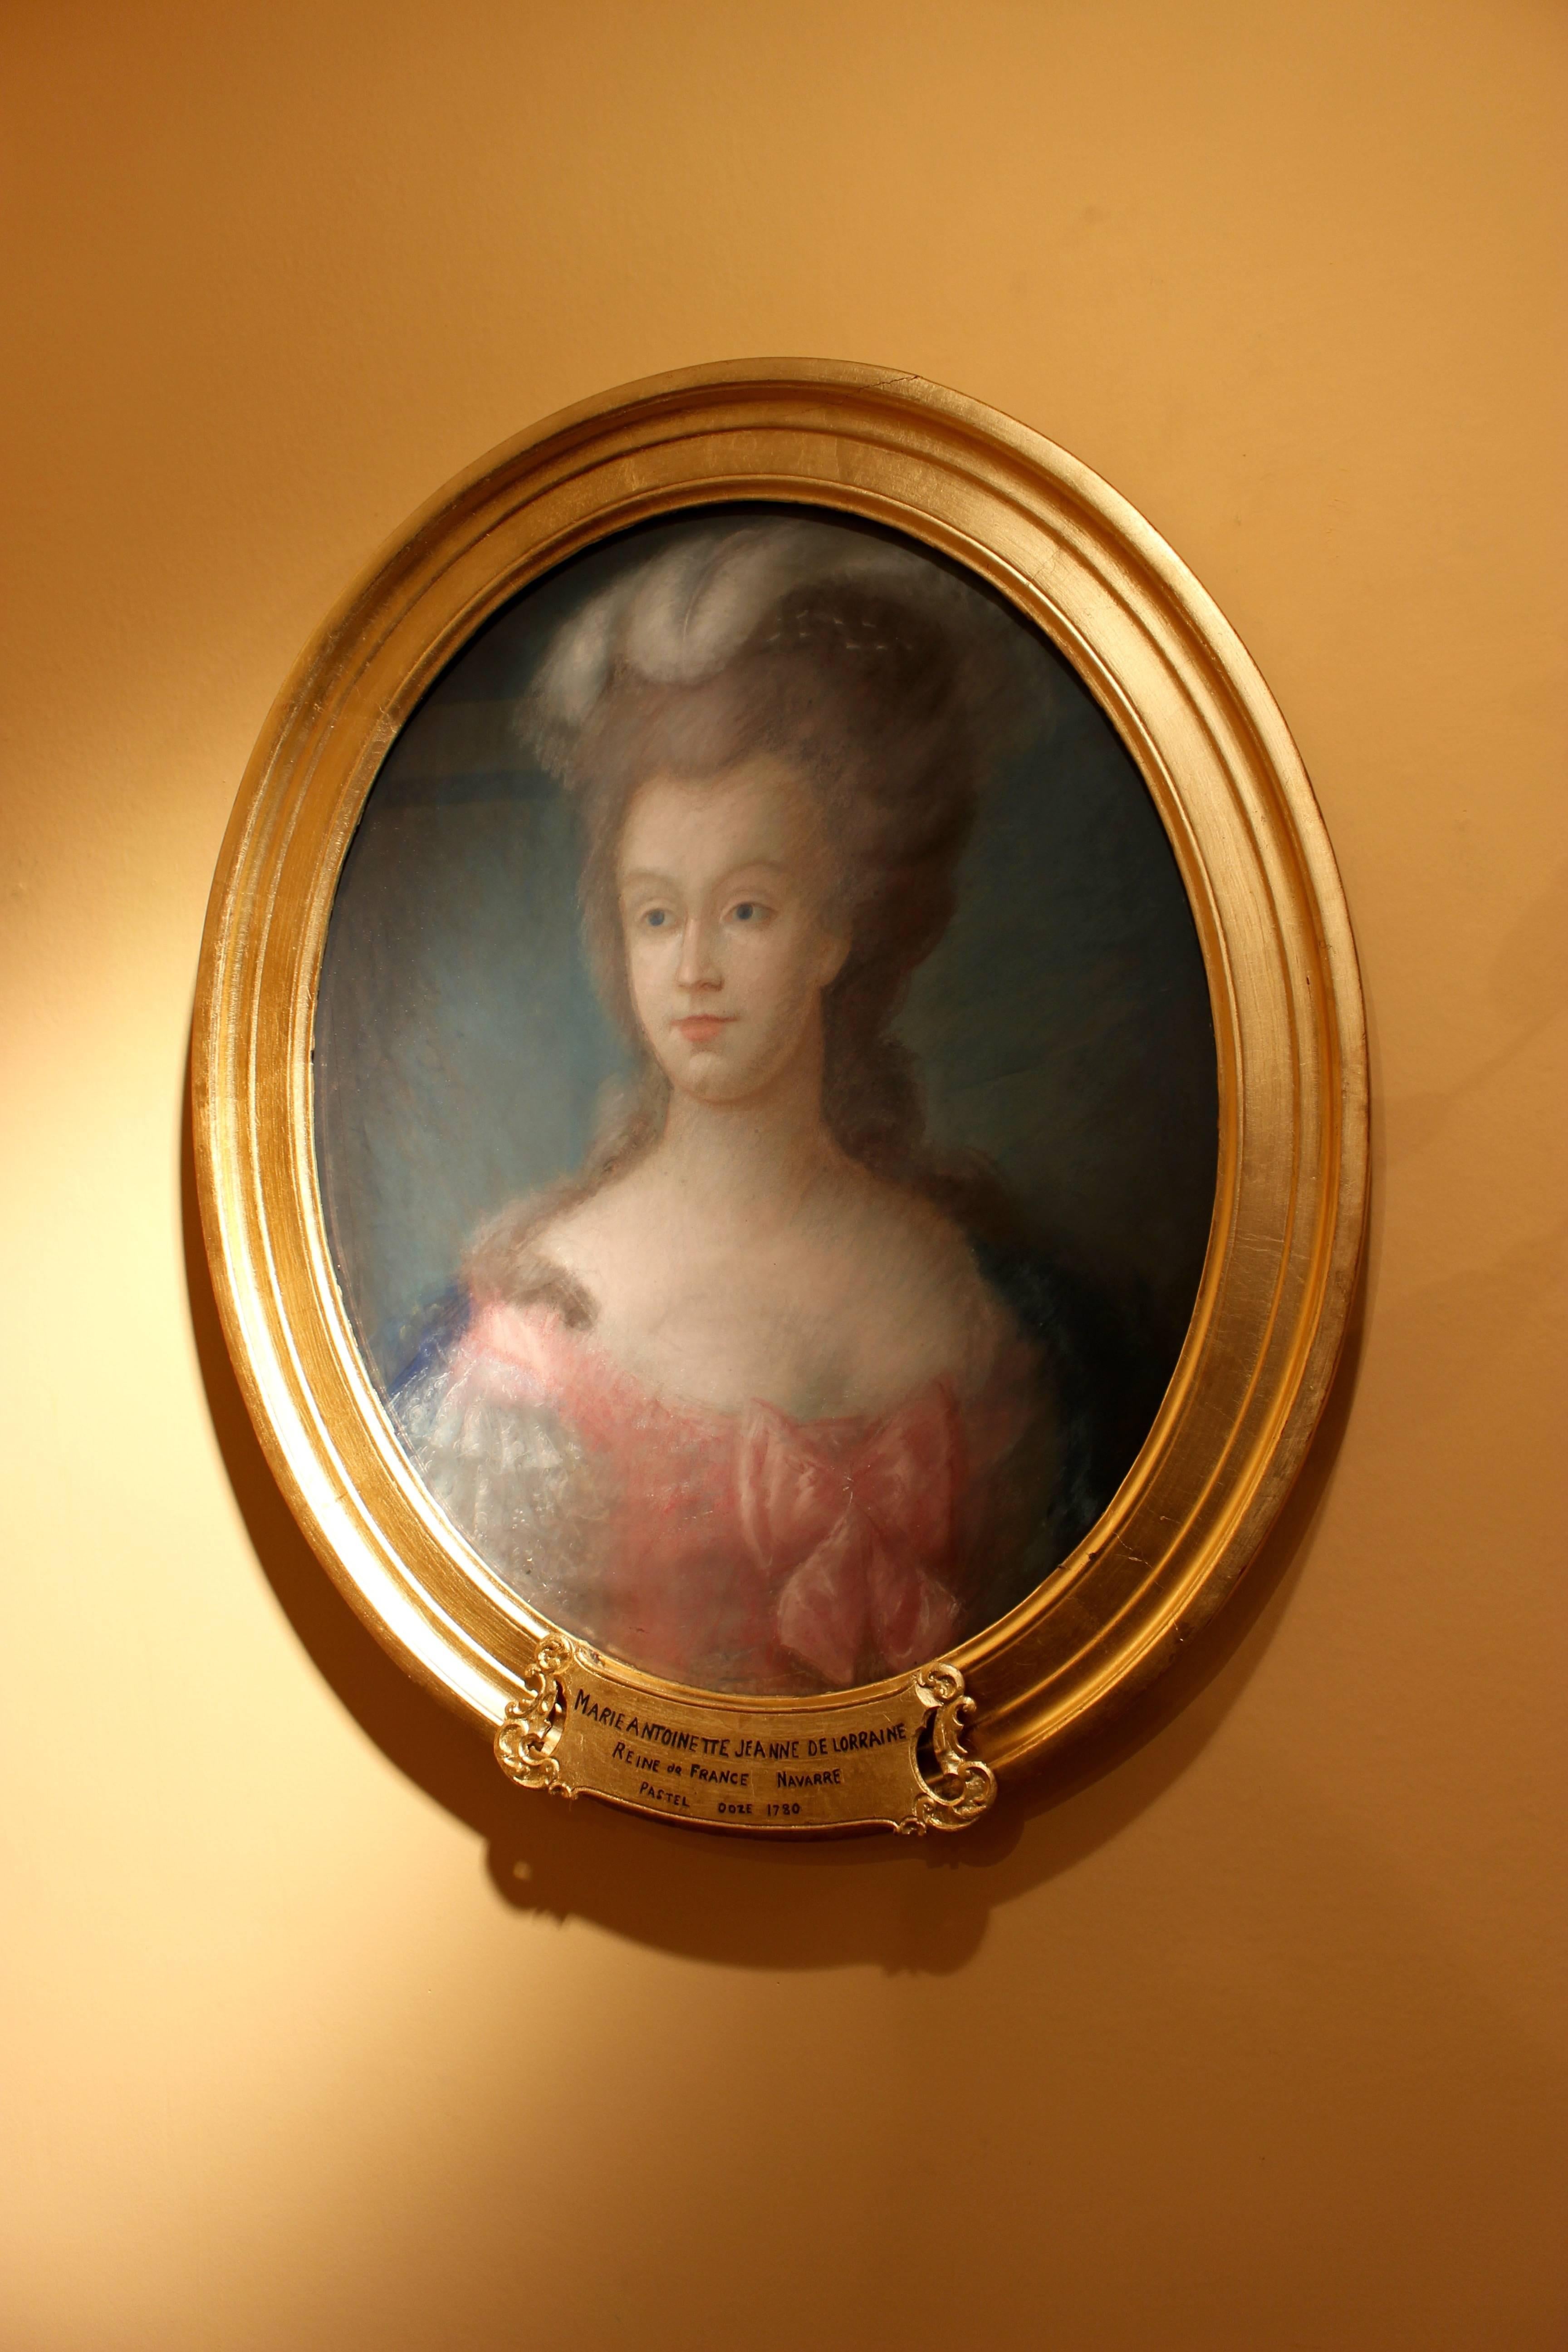 A French late 18th century pastel on canvas piece depicting Queen Marie-Antoinette by Marie-Geneviève Navarre in its original oval frame. This exquisite oval painting features Queen Marie-Antoinette, represented in 1780, nine years before the French